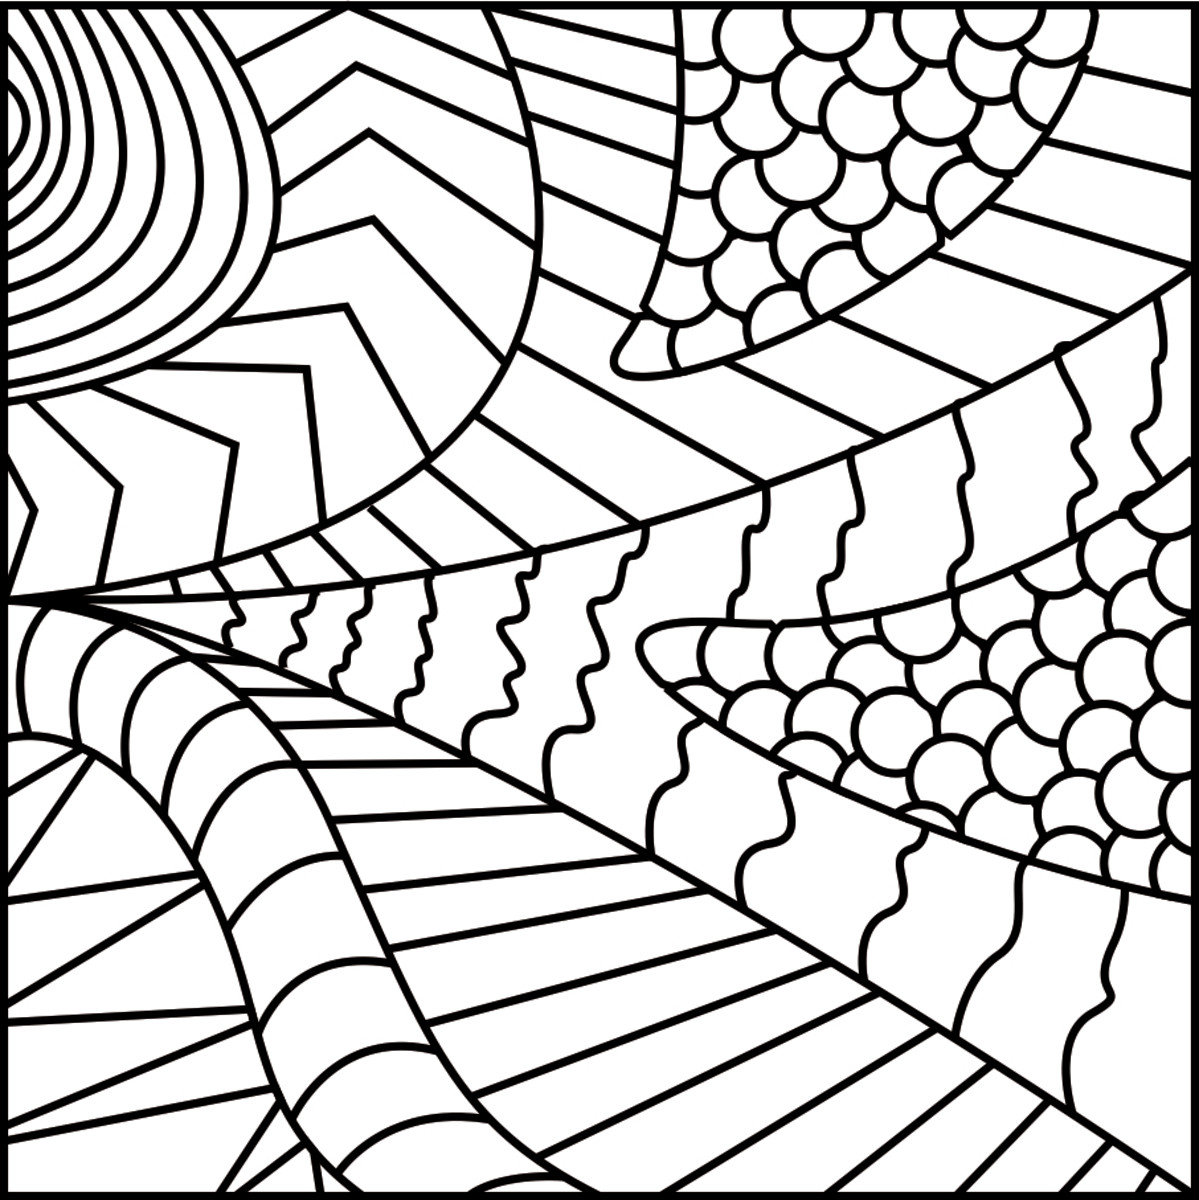 Step 4. Repeat step three until your Zentangle is complete. Here is a Zentangle with every section filled.